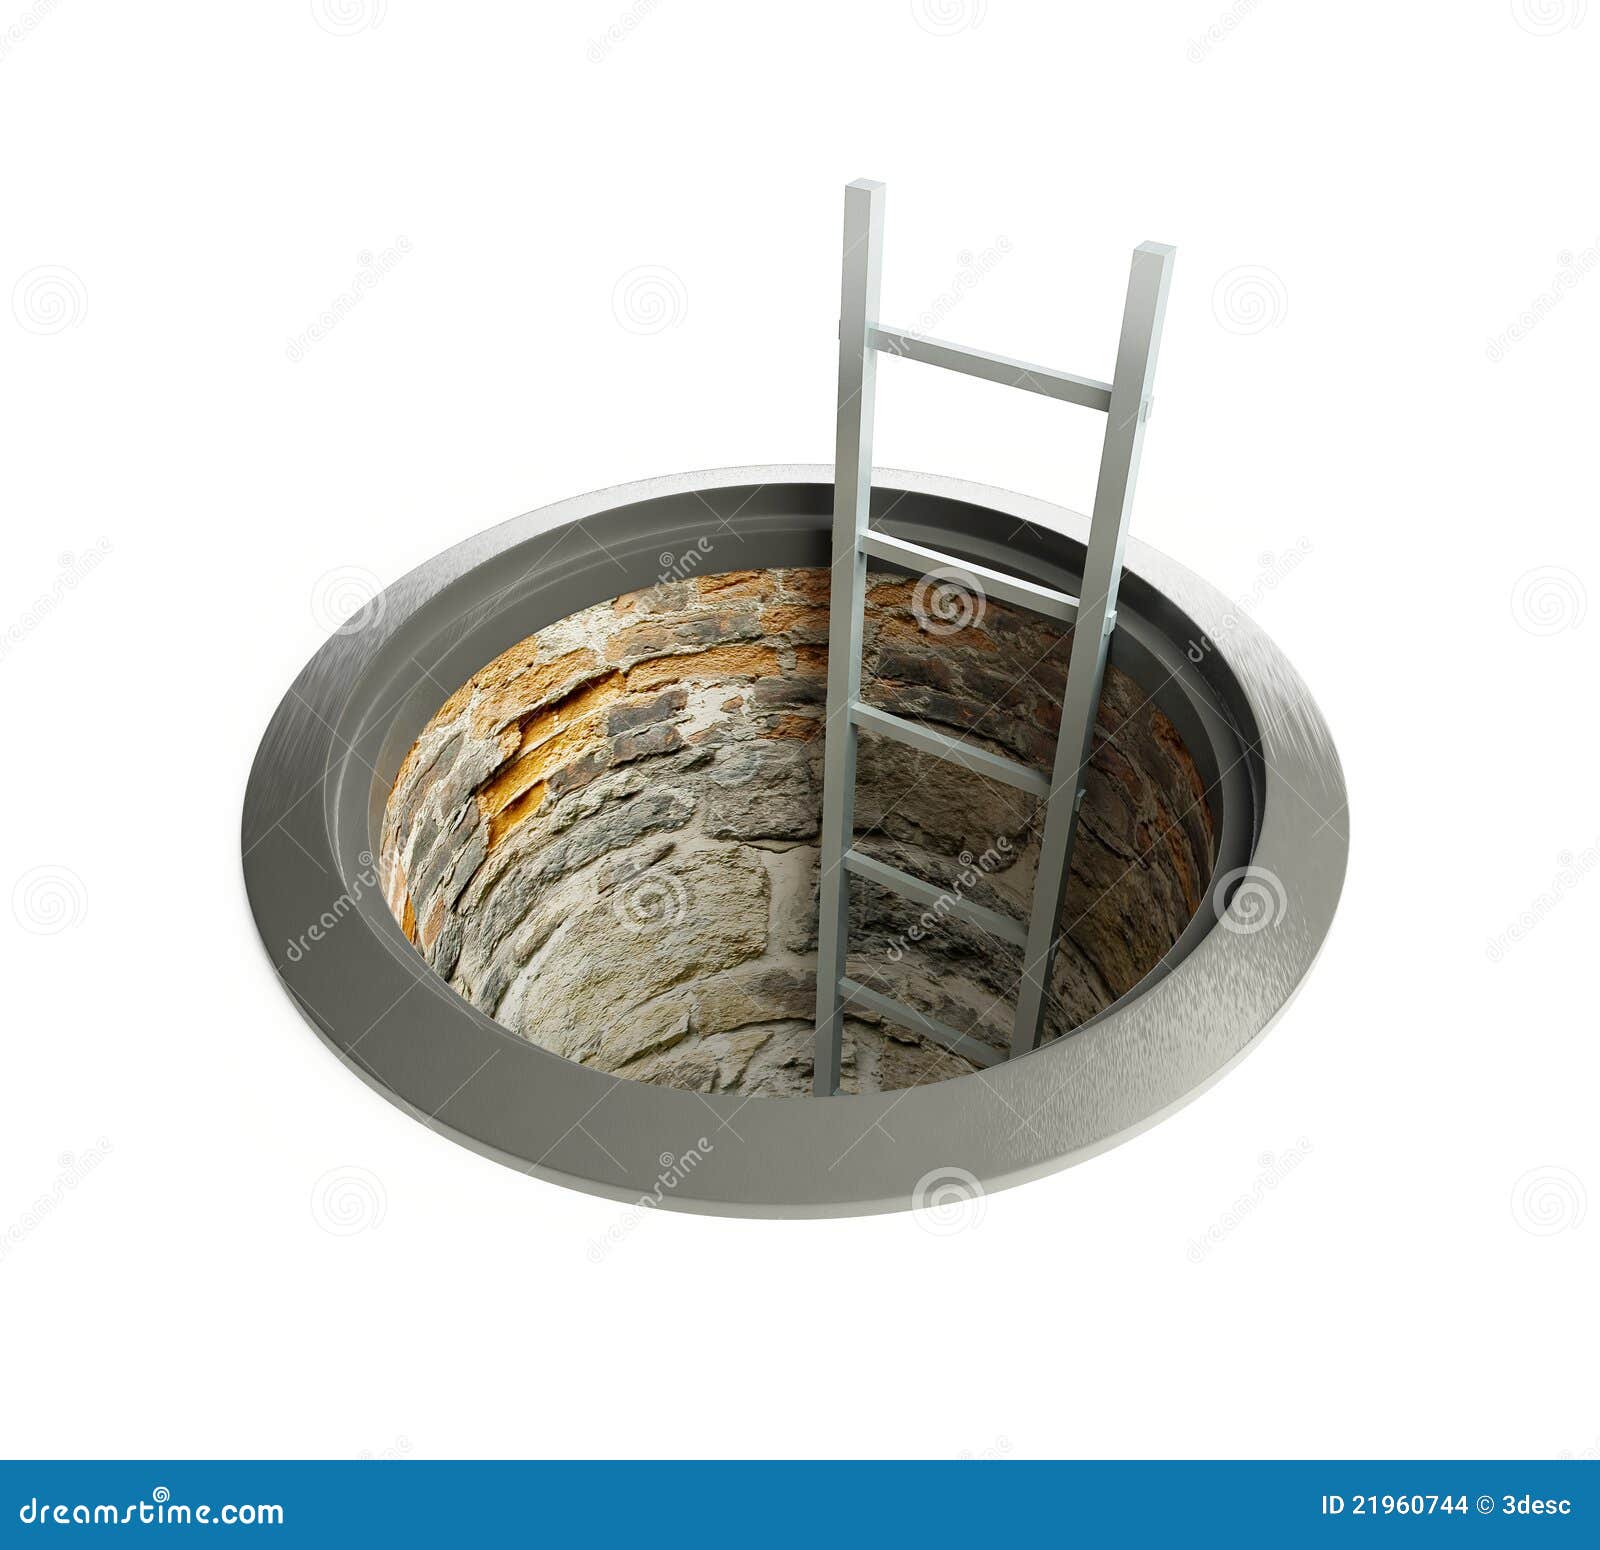 open manhole with a ladder inside